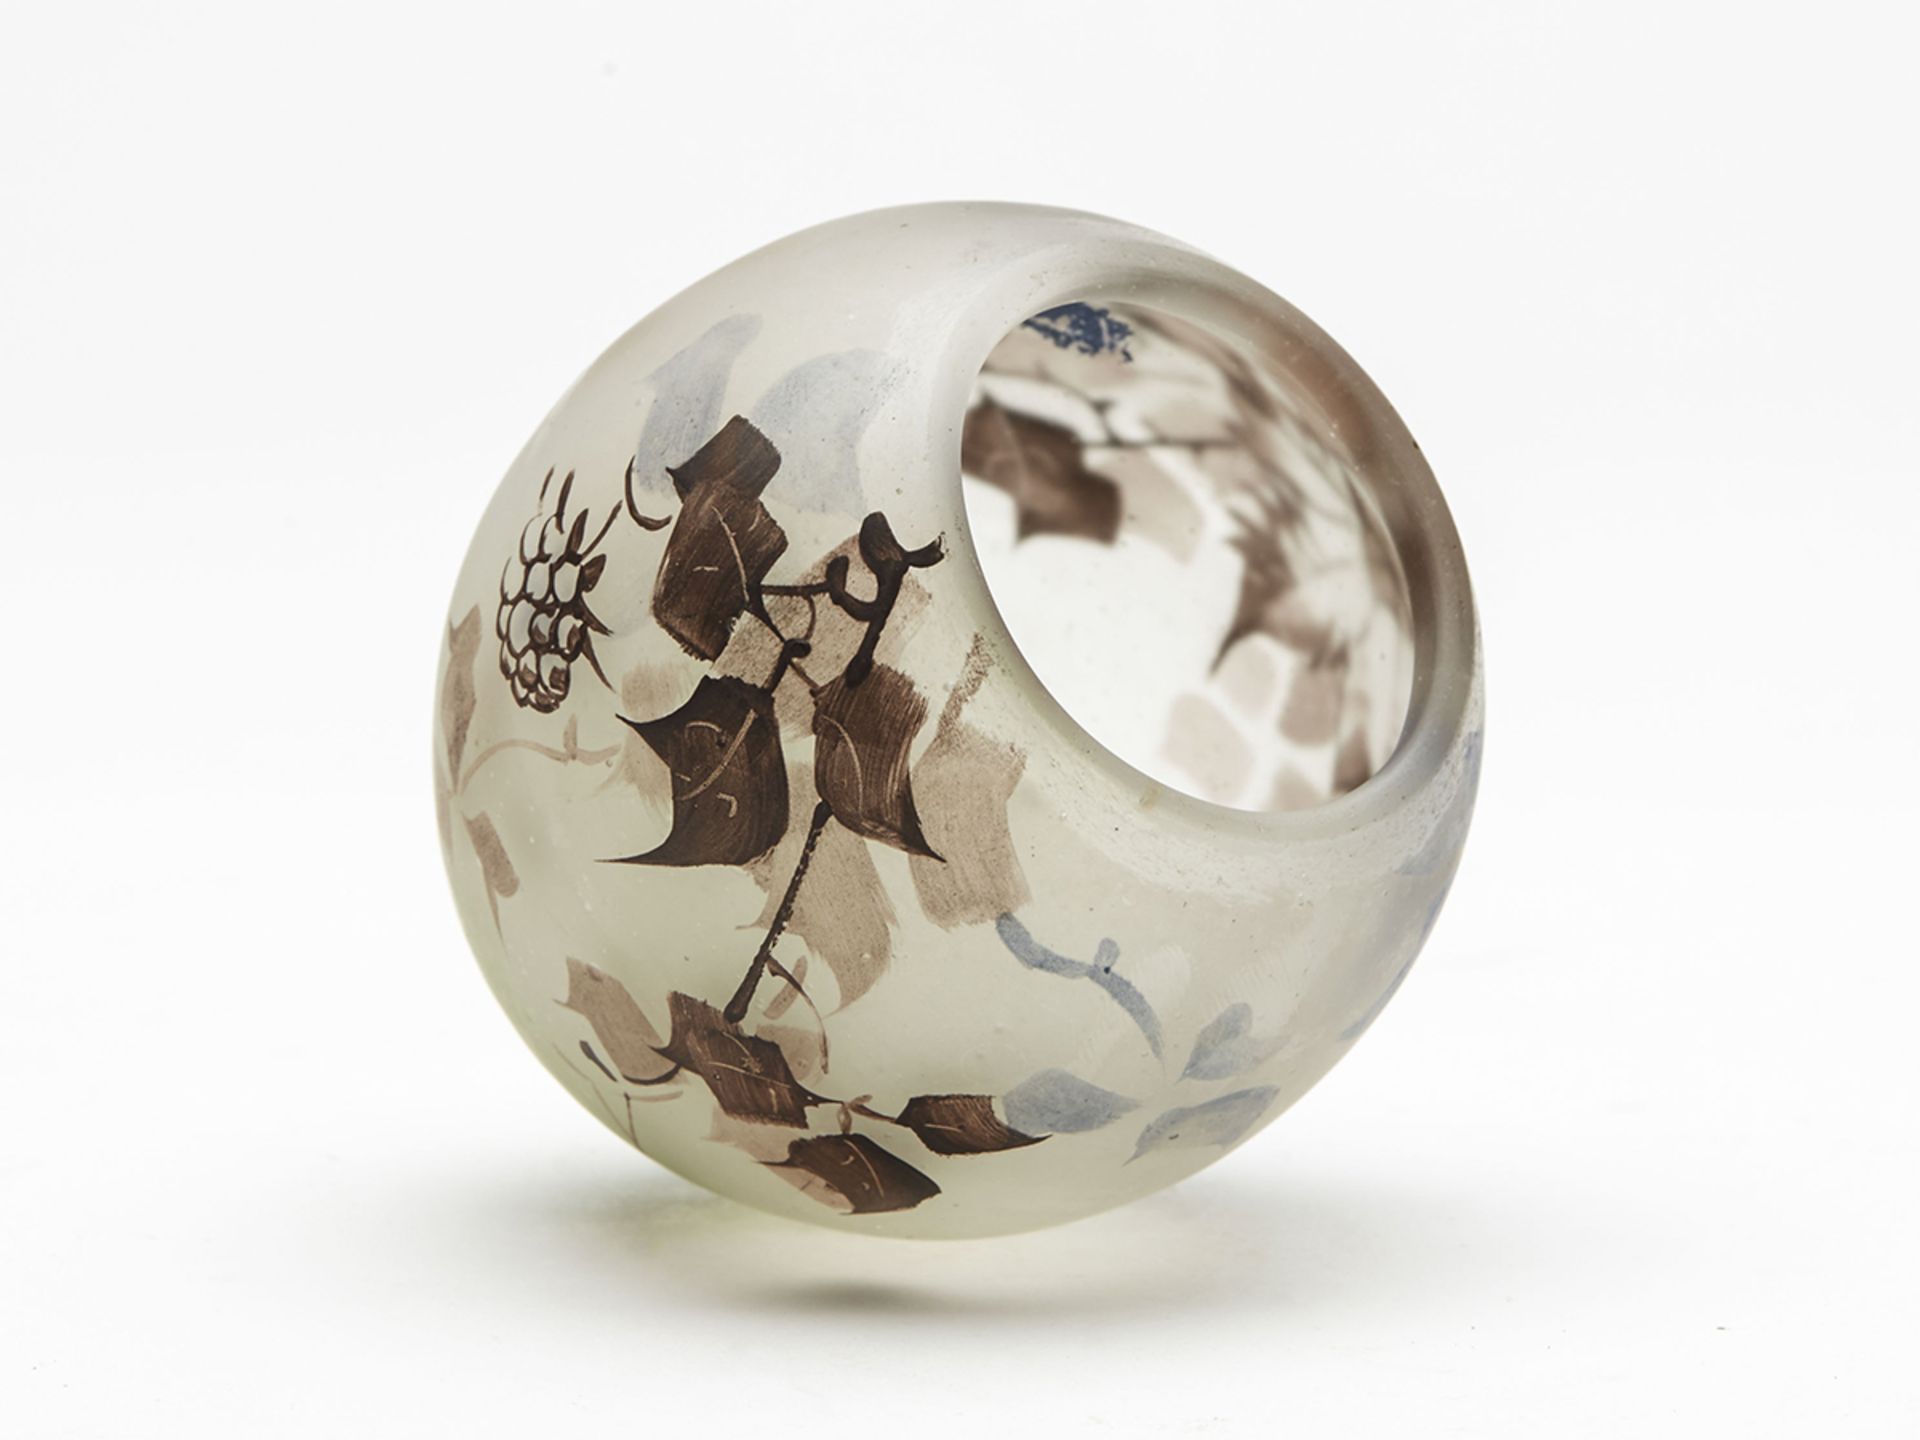 Jean-Simon Paynaud Fruiting Stem Etched Glass Vase C.1910 - Image 5 of 8